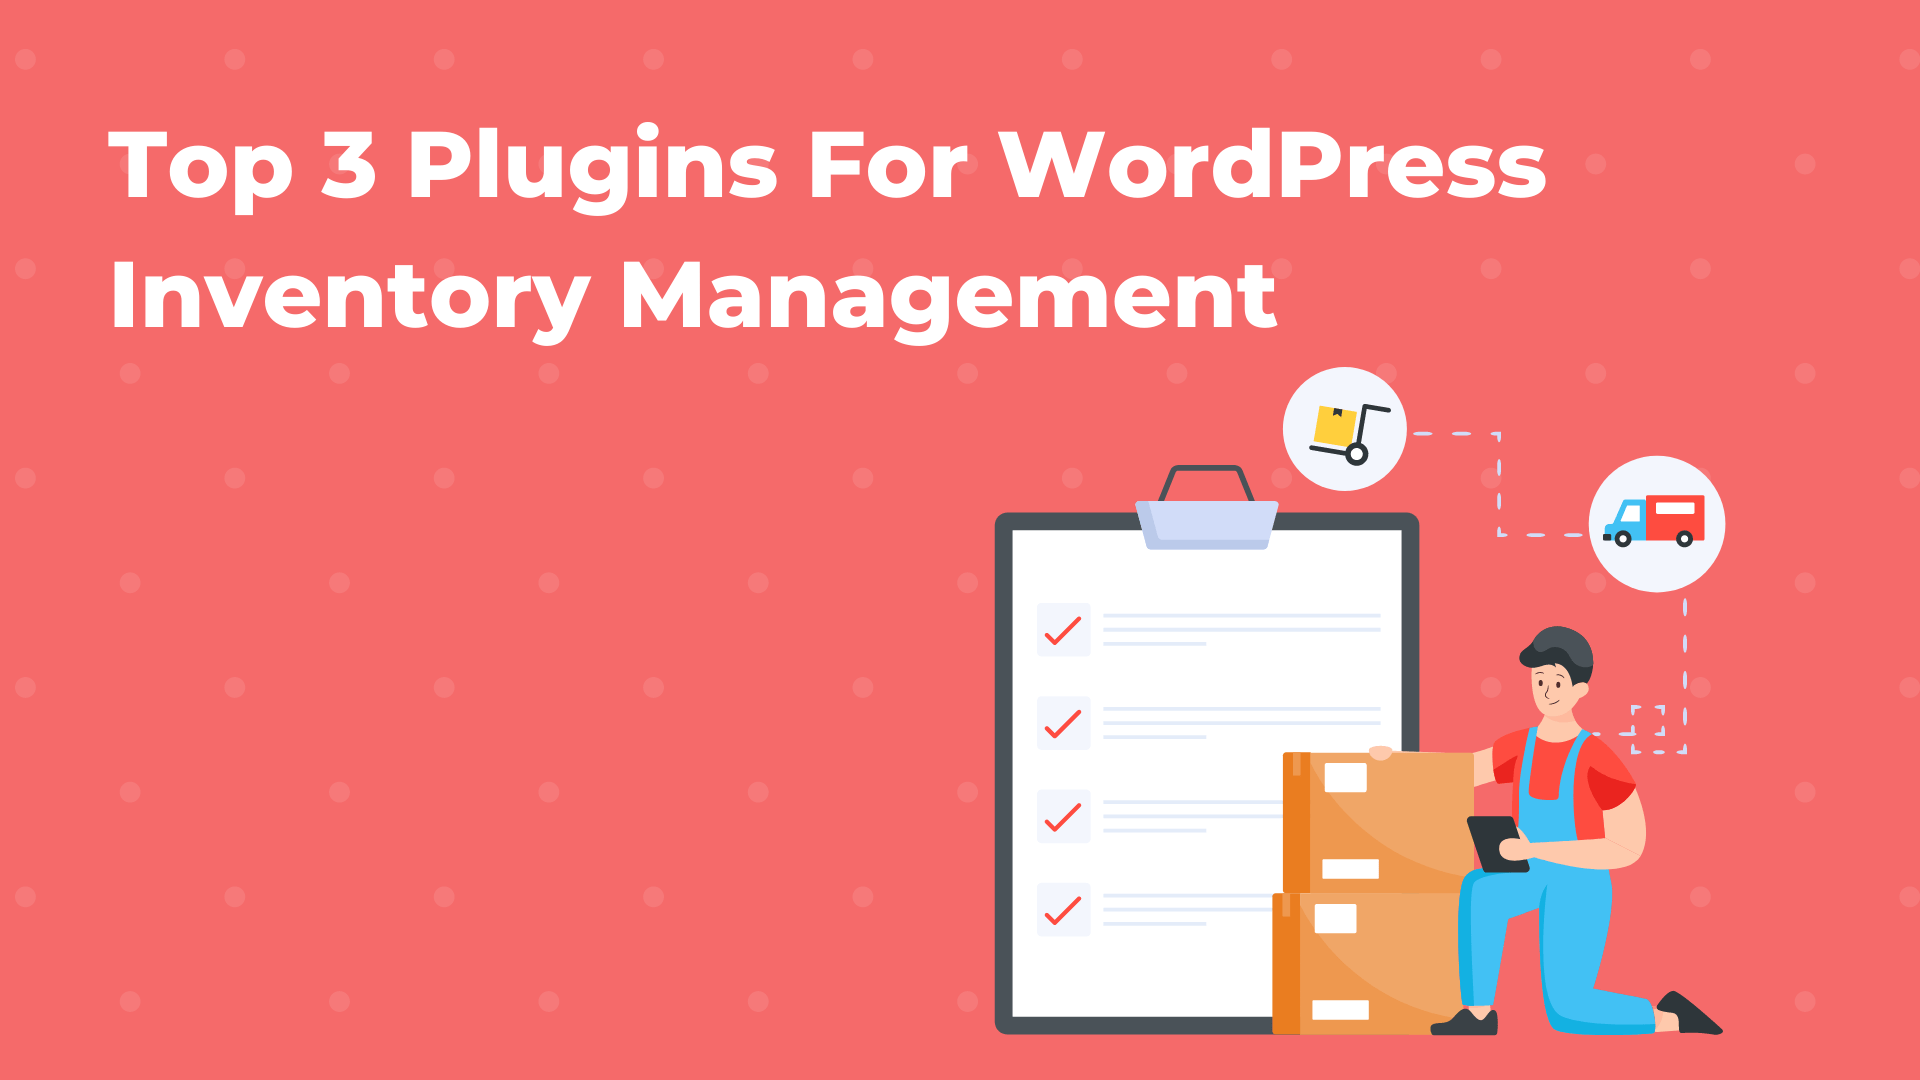 Top 3 Plugins for WordPress Inventory Management